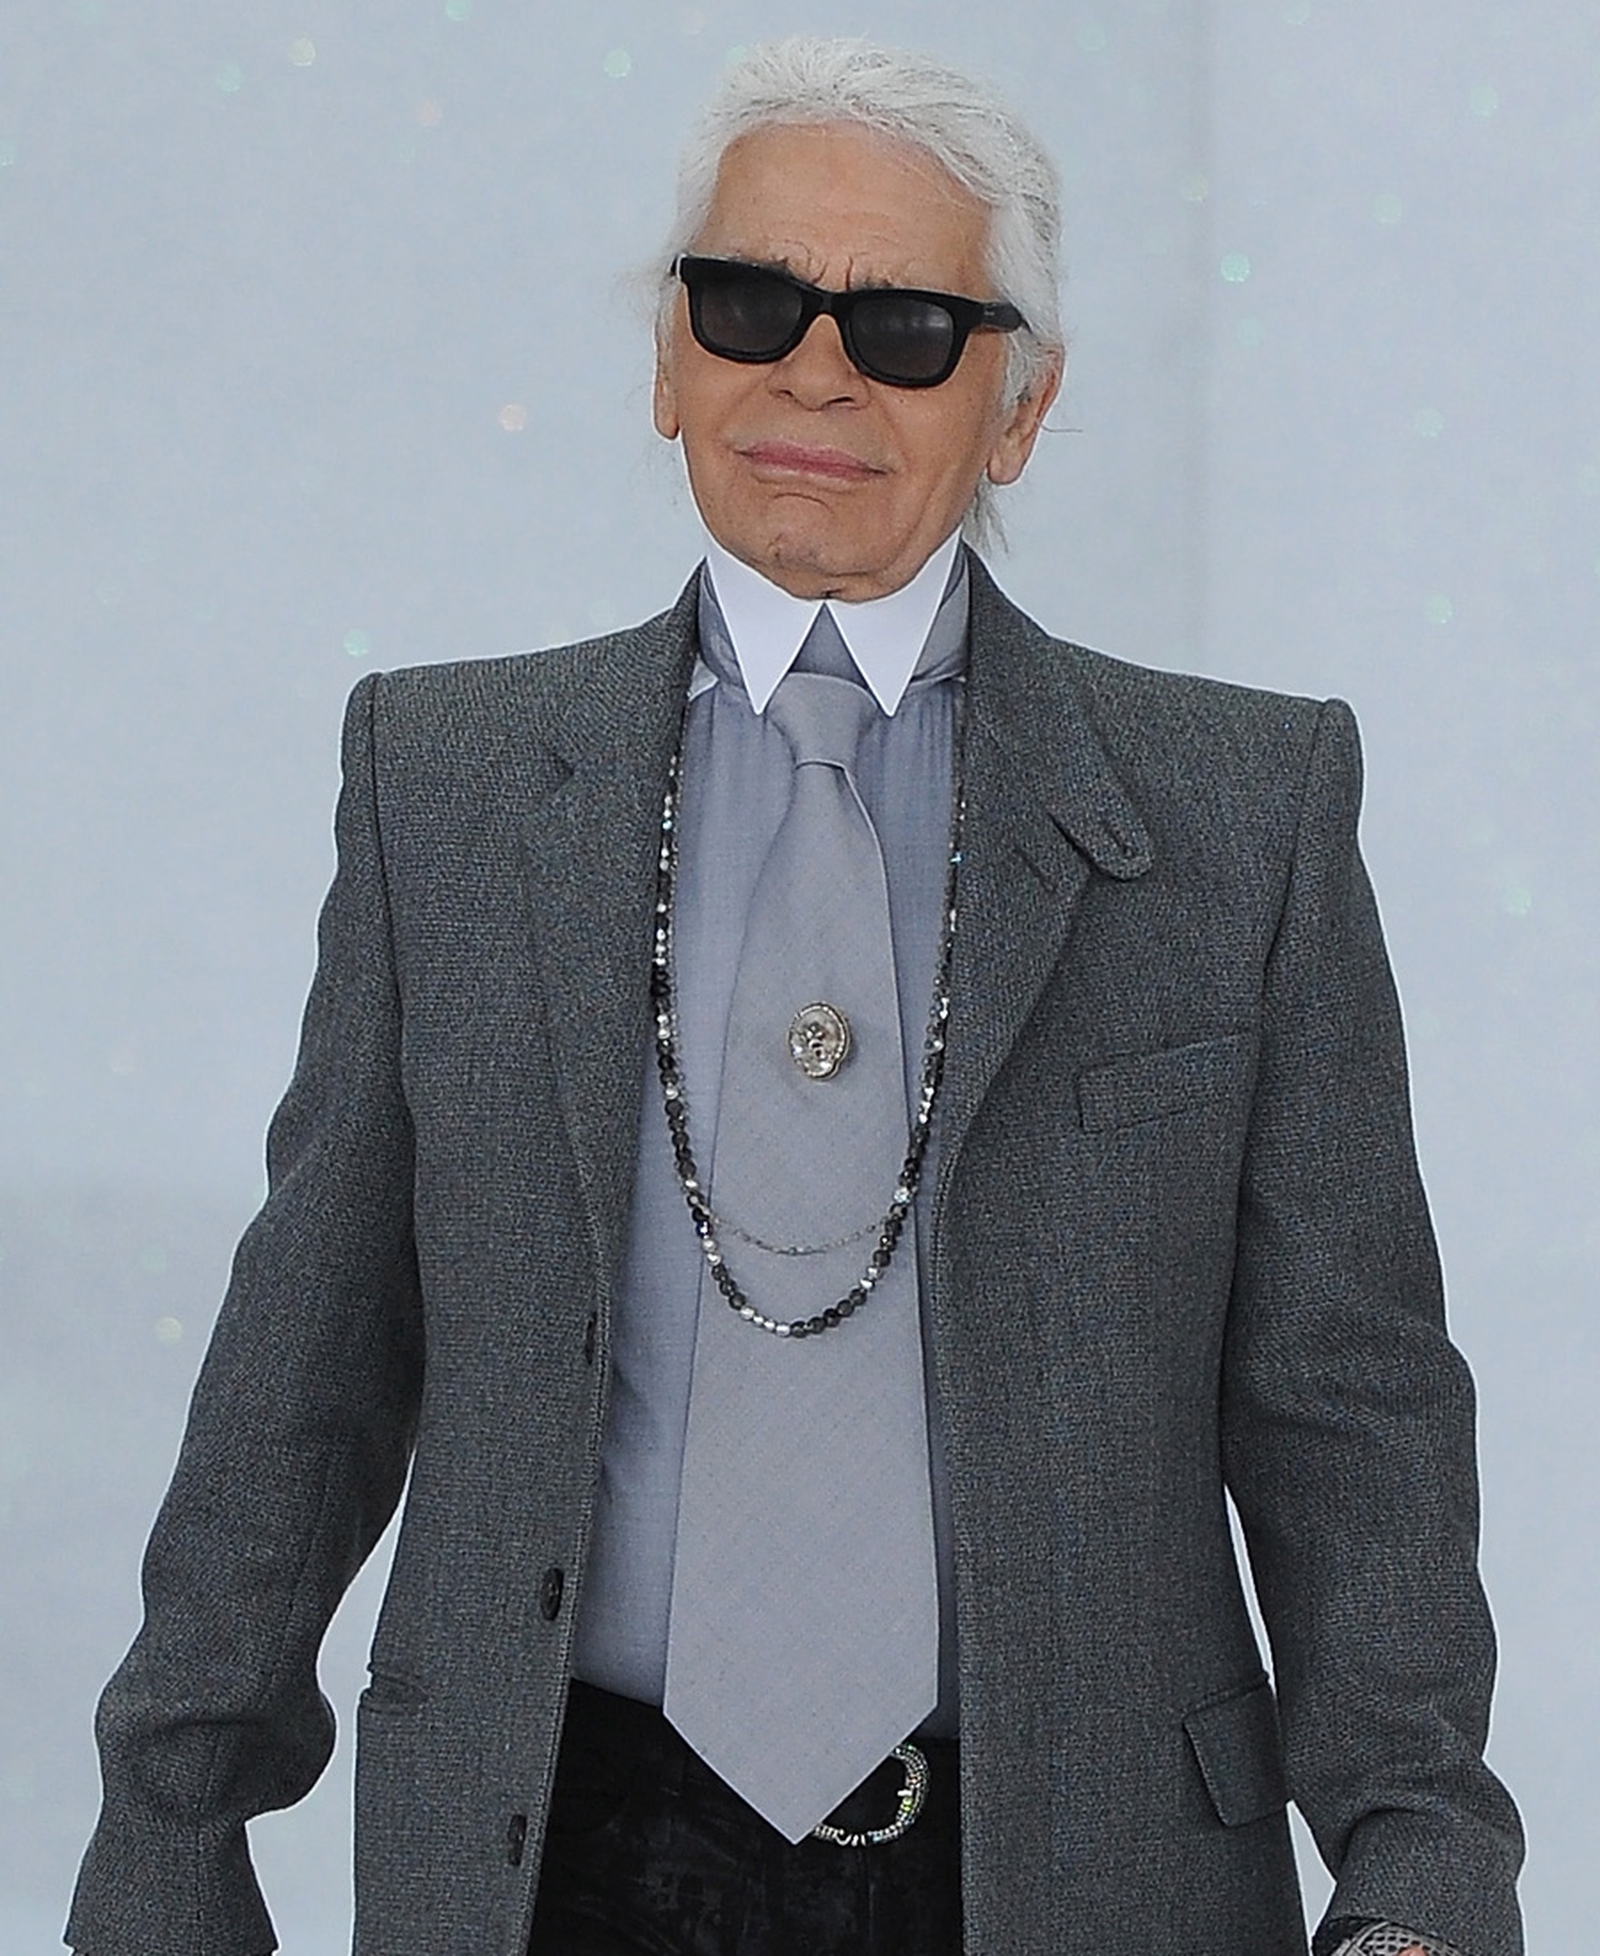 Lagerfeld shares his views on cosmetic surgery